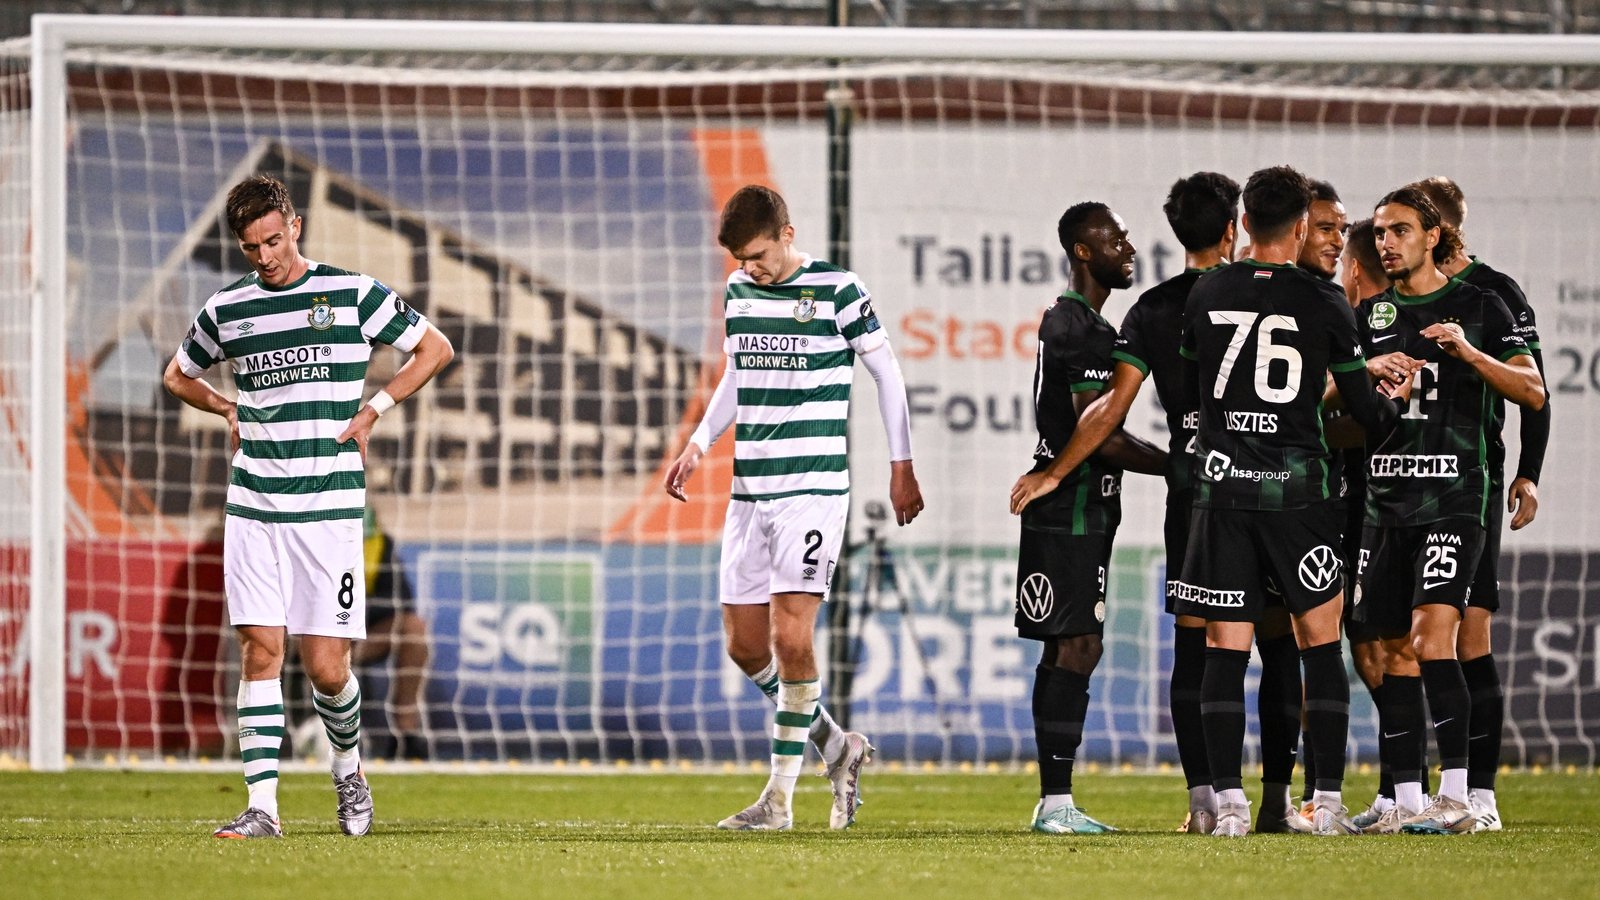 Ferencvarosi TC 4 - 0 Shamrock Rovers - PREVIEW, 2023/2024 Europa  Conference League Second Qualifying Round